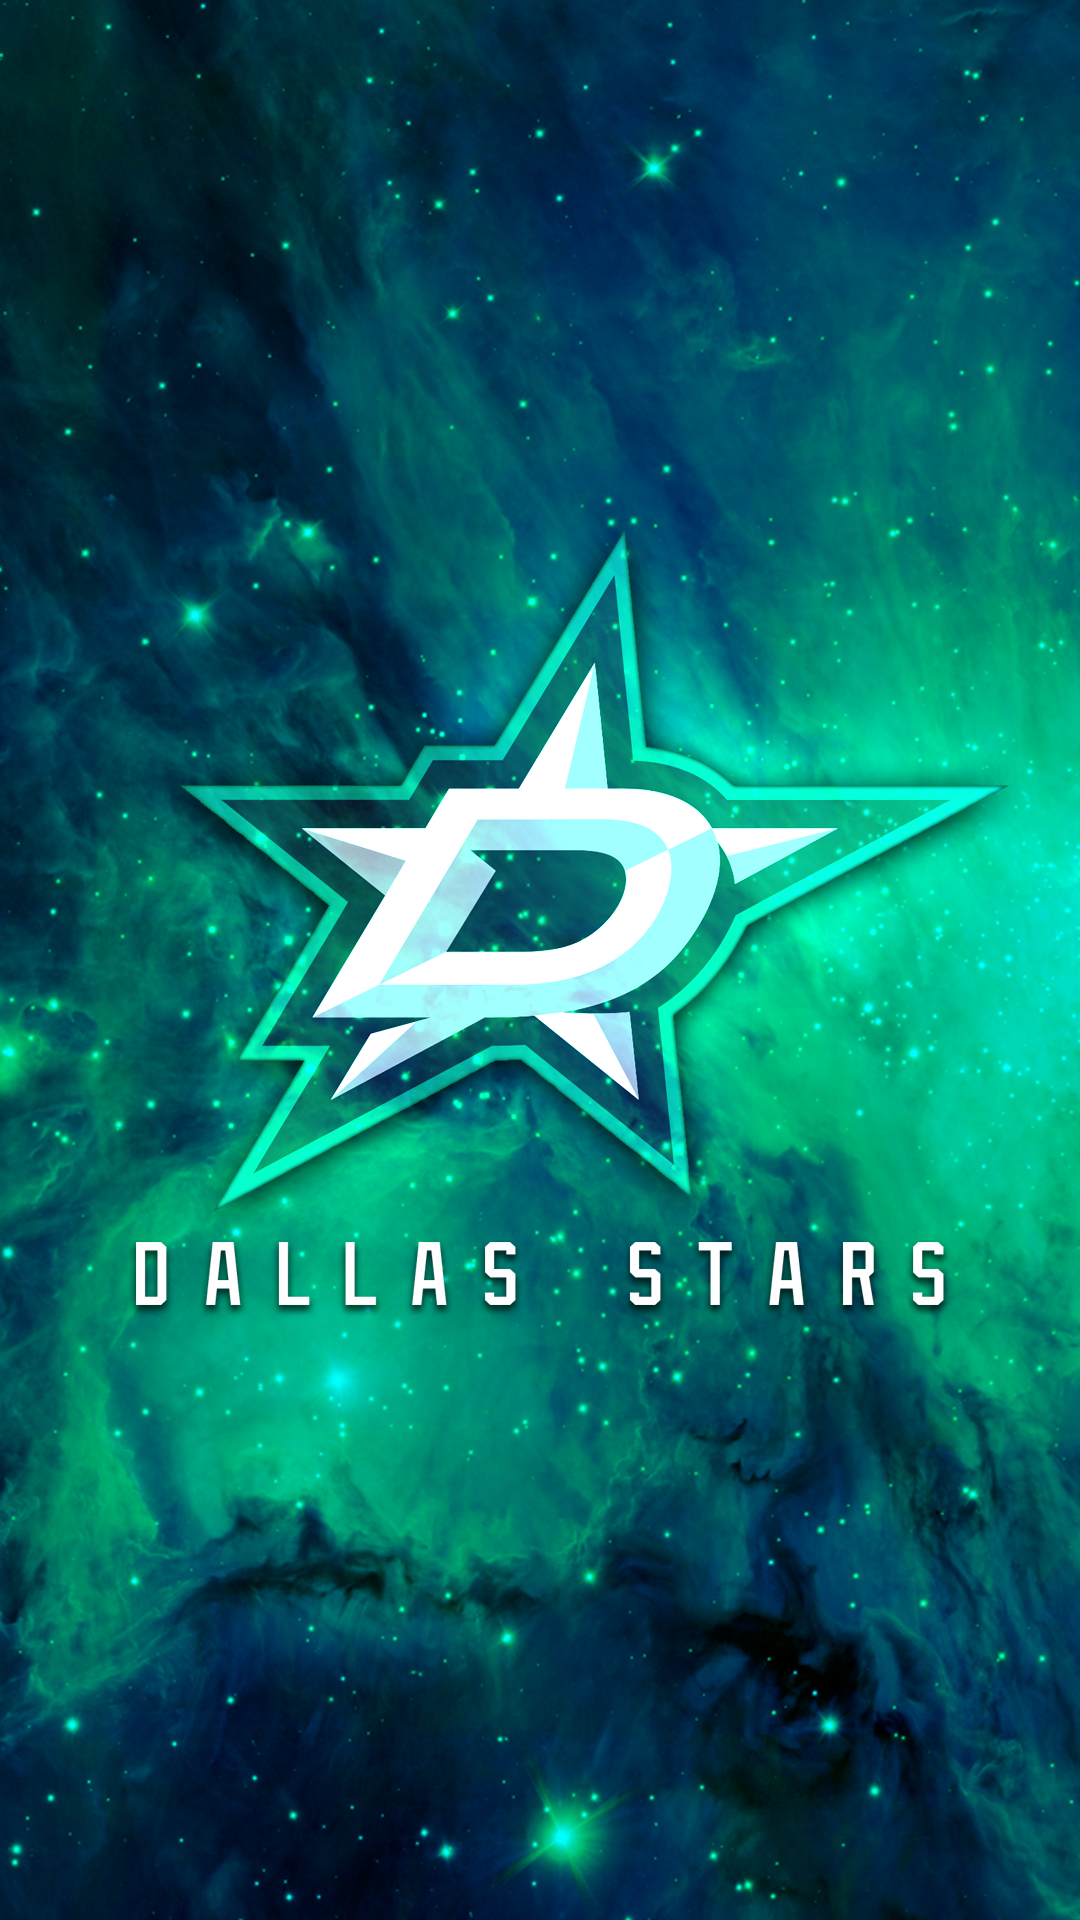 Dallas Stars Wallpapers images in Collection Page